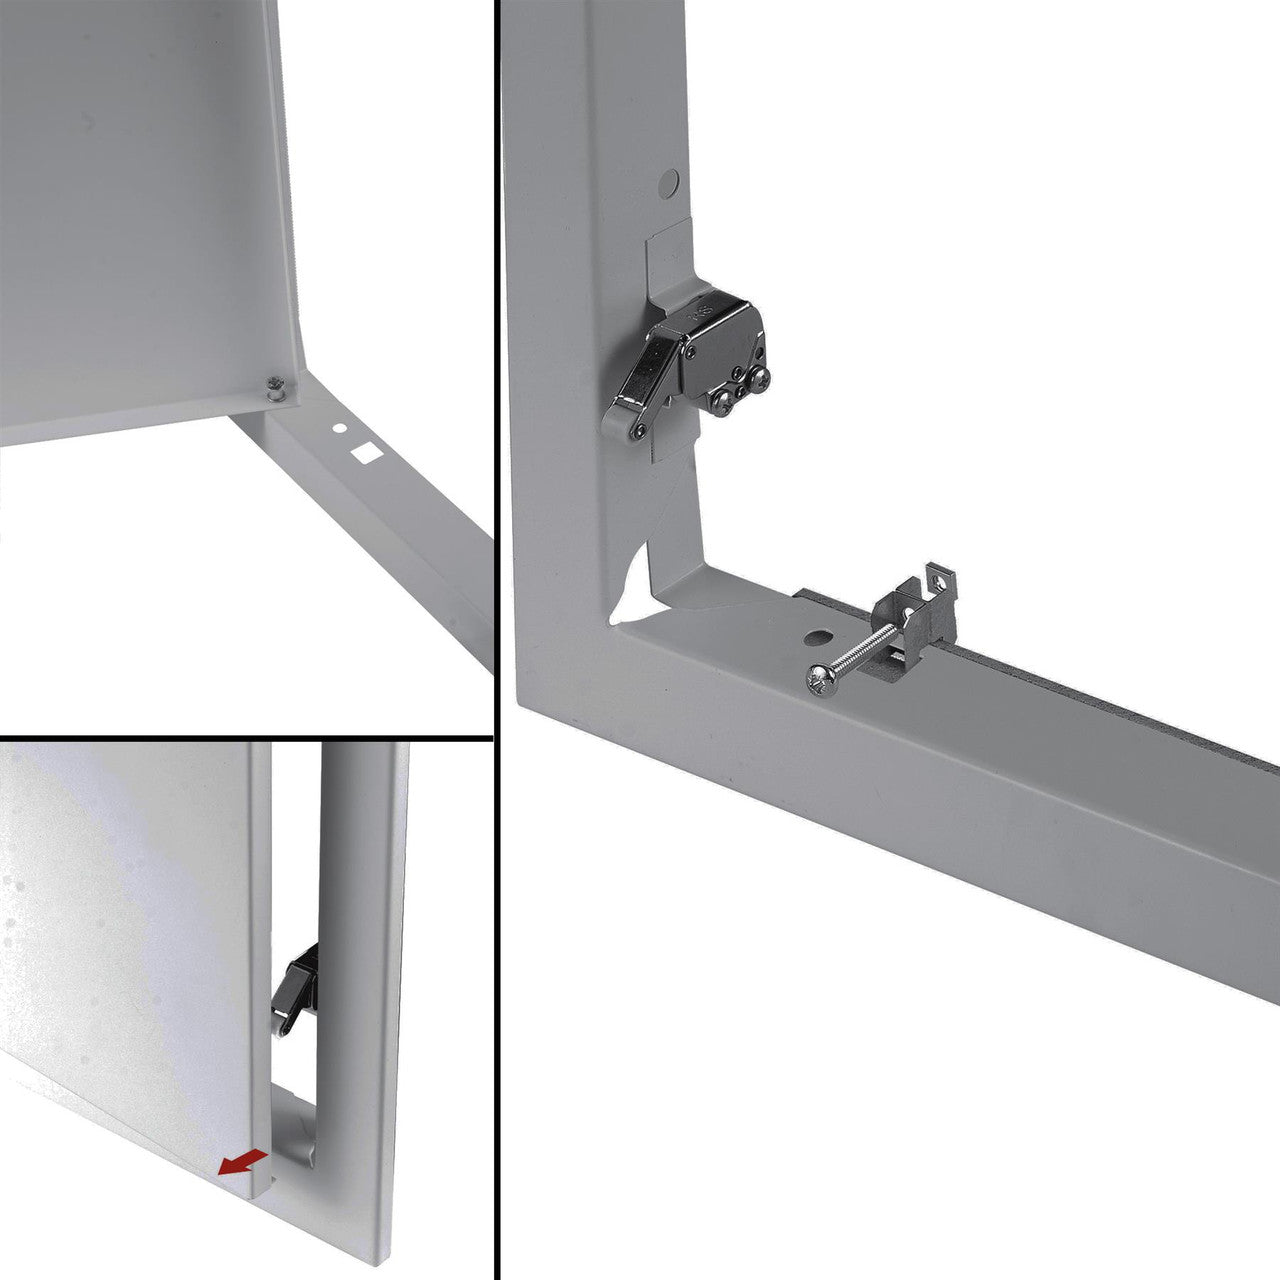 Access Panel Stainless Steel Inspection Door Revision